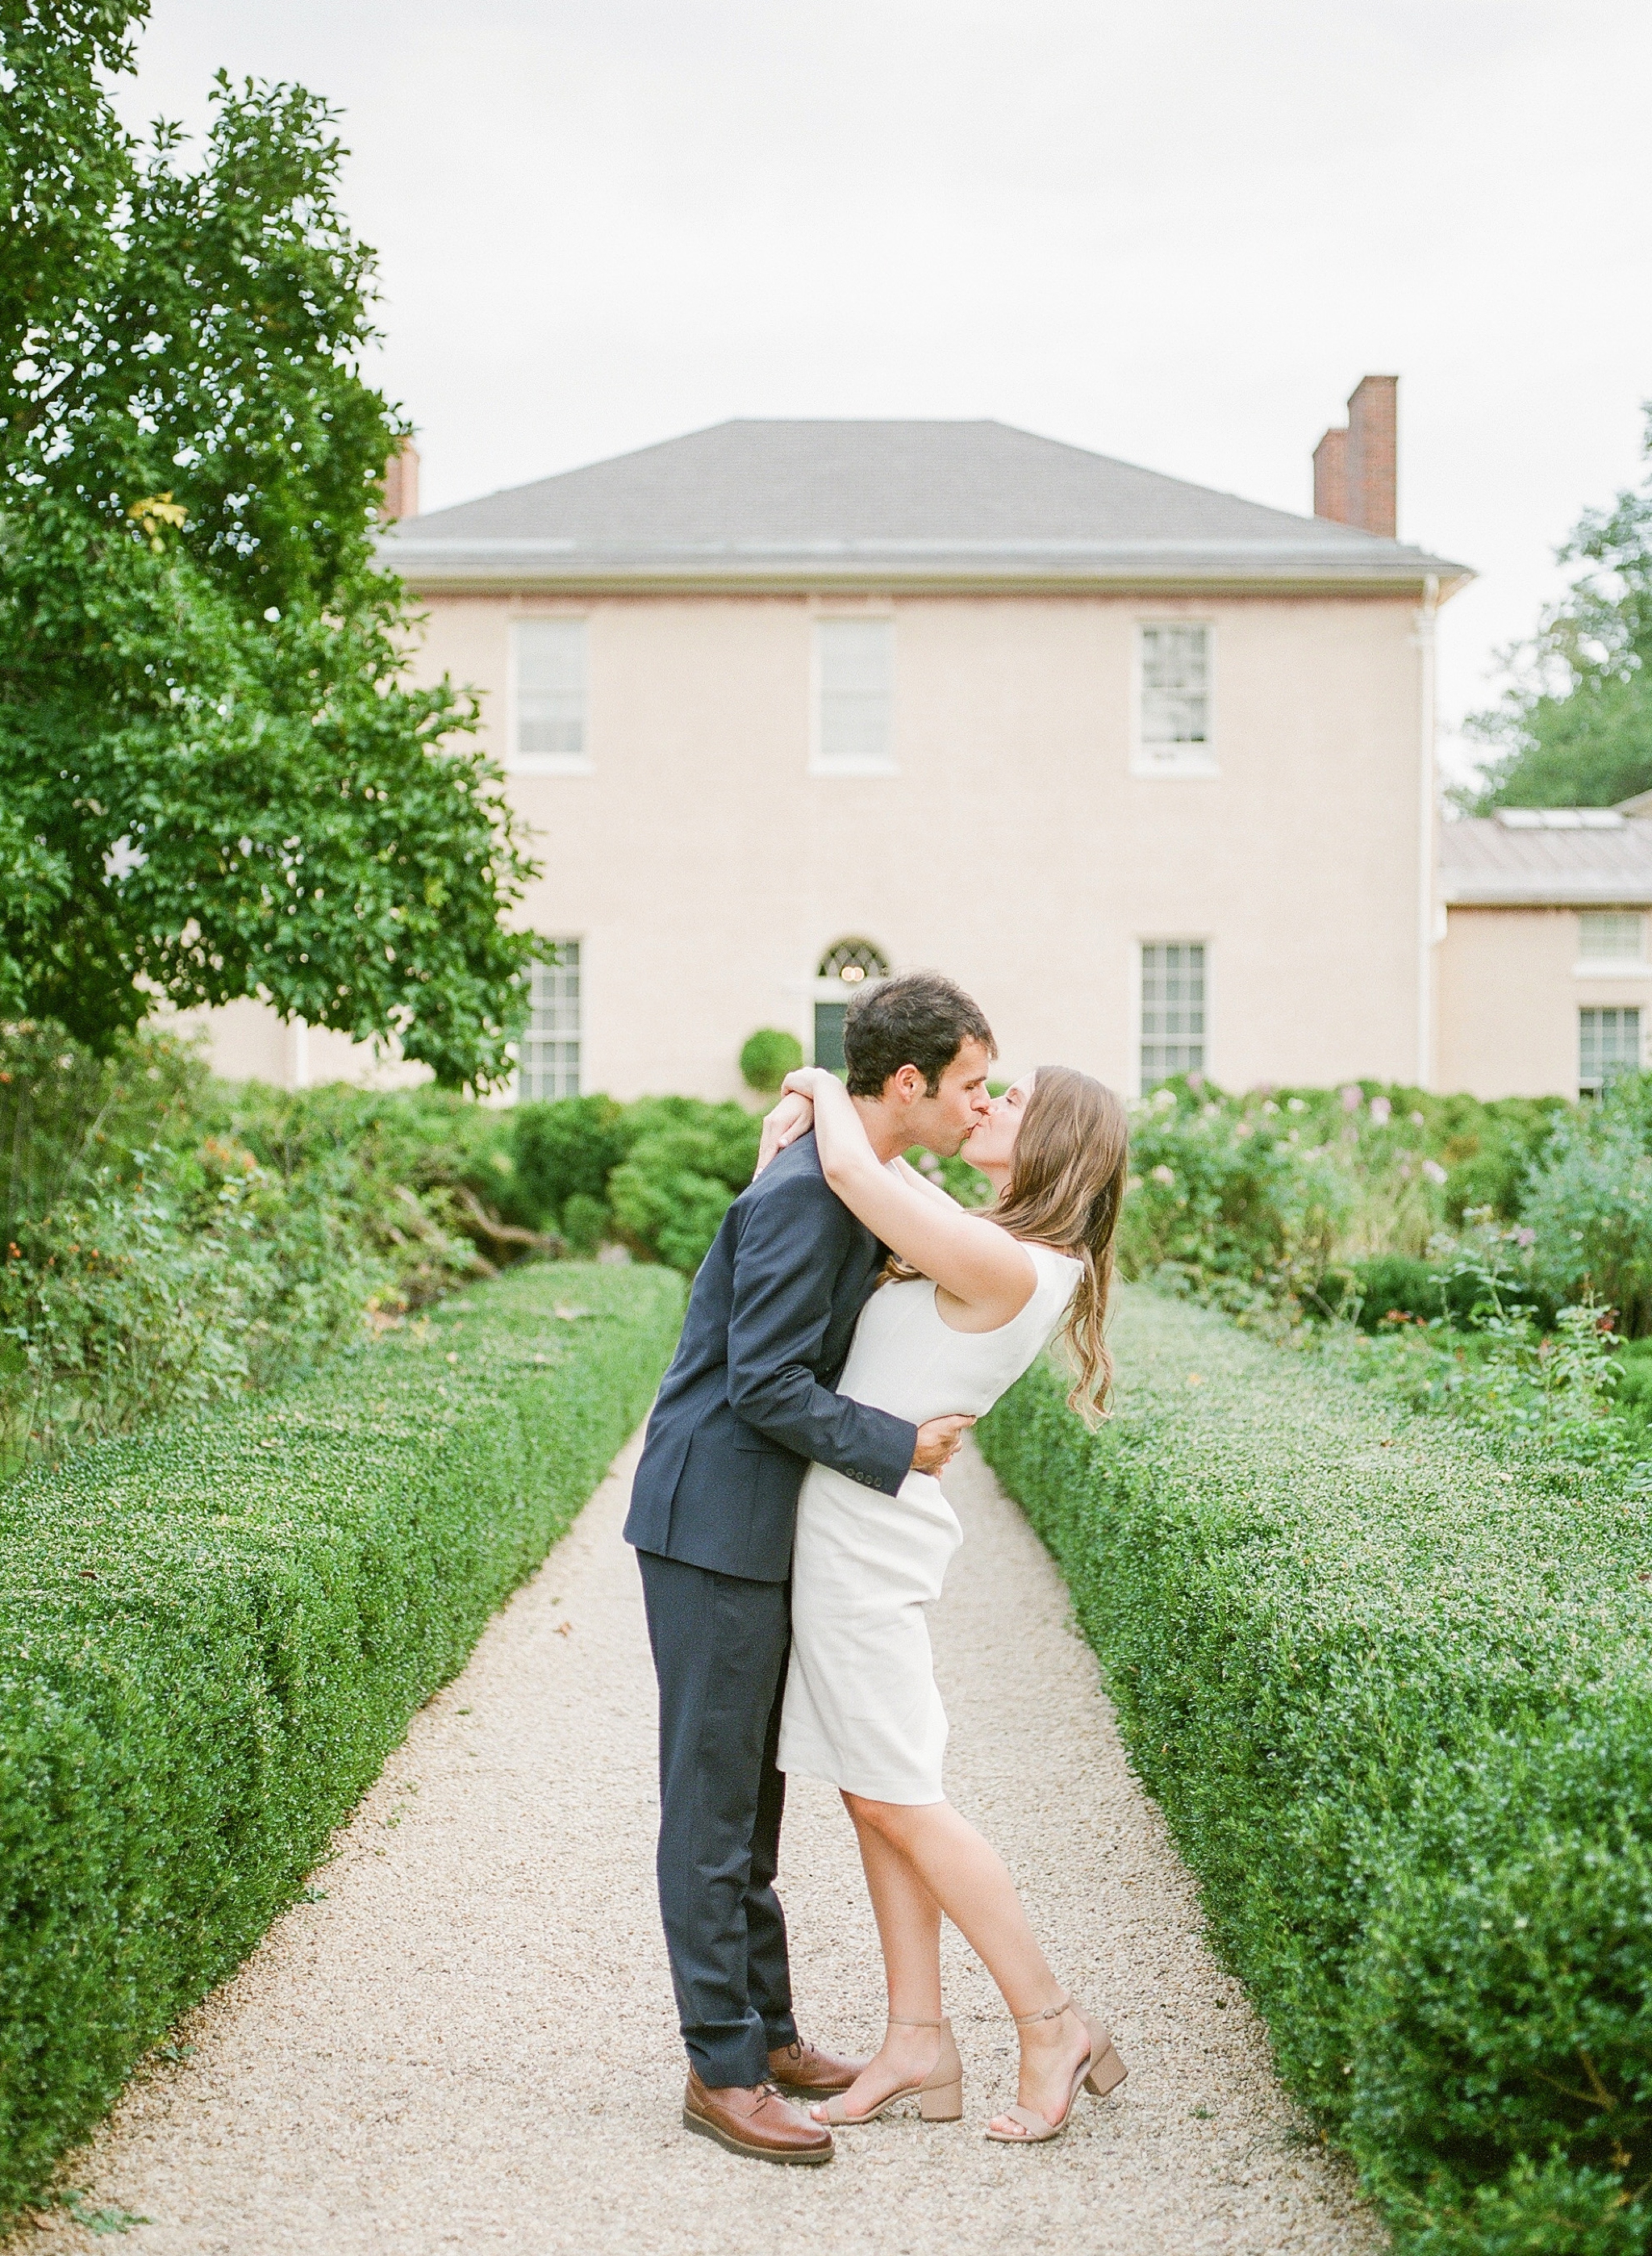 A romantic engagement session in the stunning gardens at Tudor Place in downtown Washington, DC.